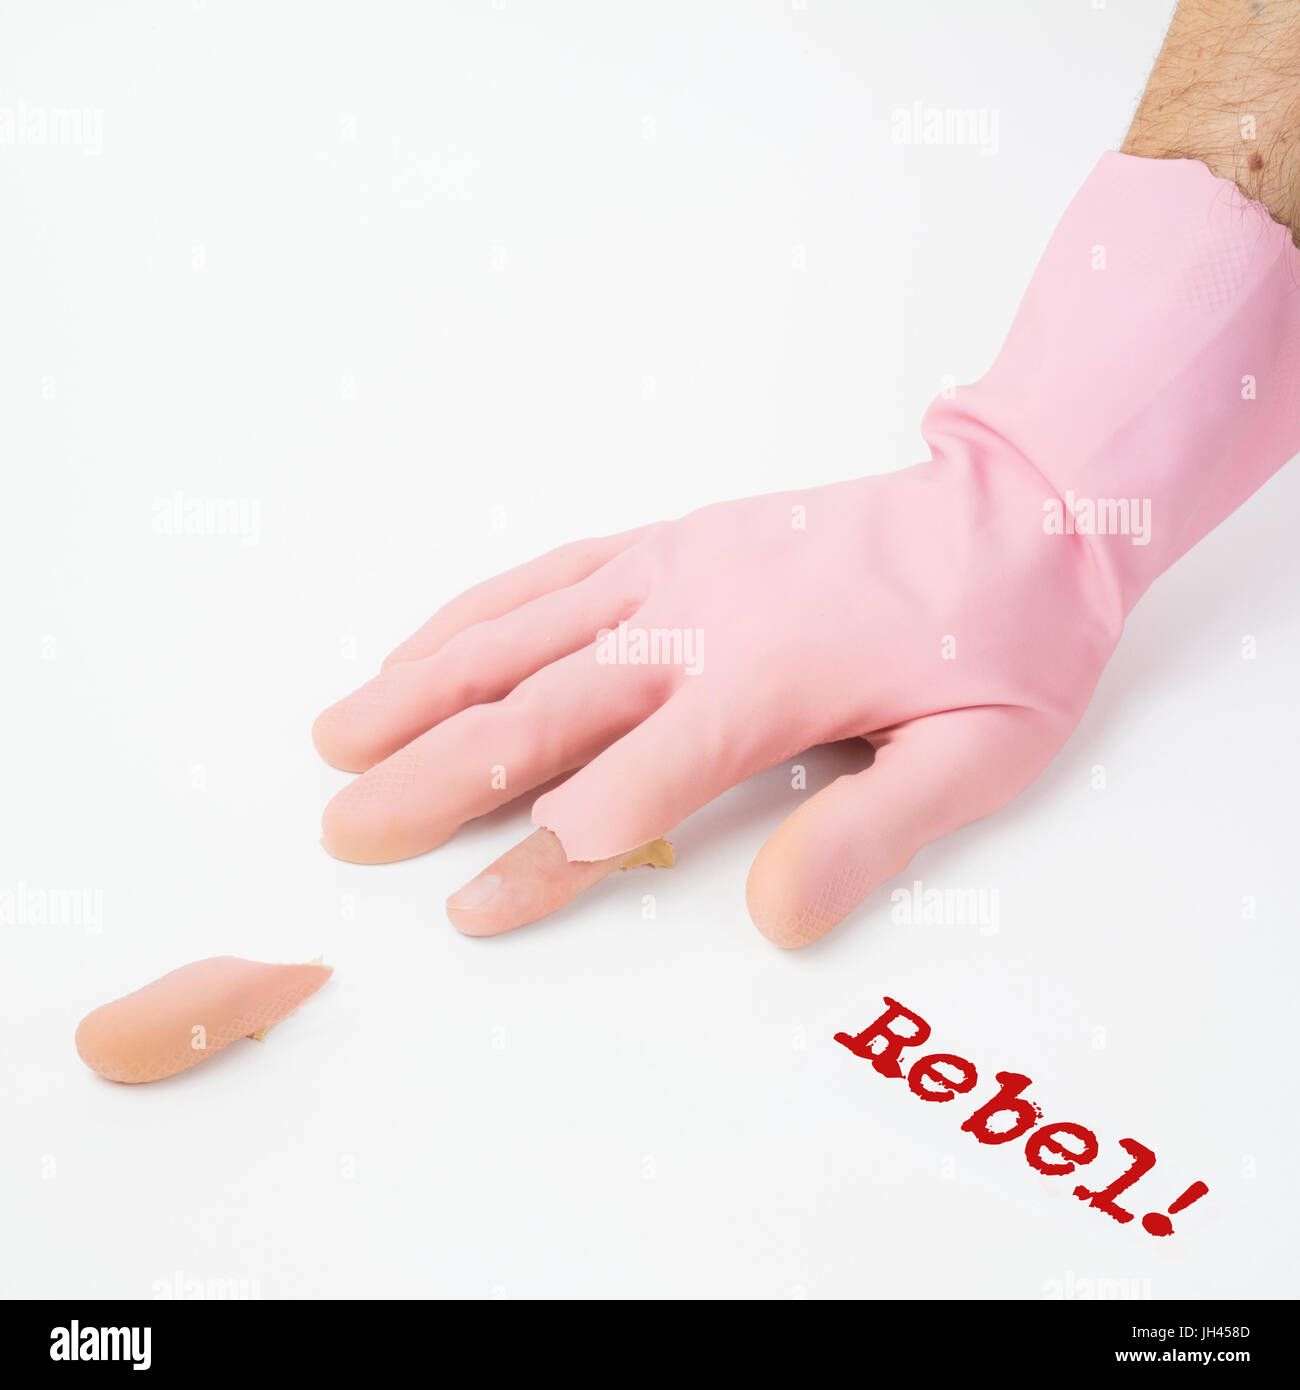 Rebel! He refuses to be a victim! He separated himself from the community. A concept made with cleaning glove. Stock Photo